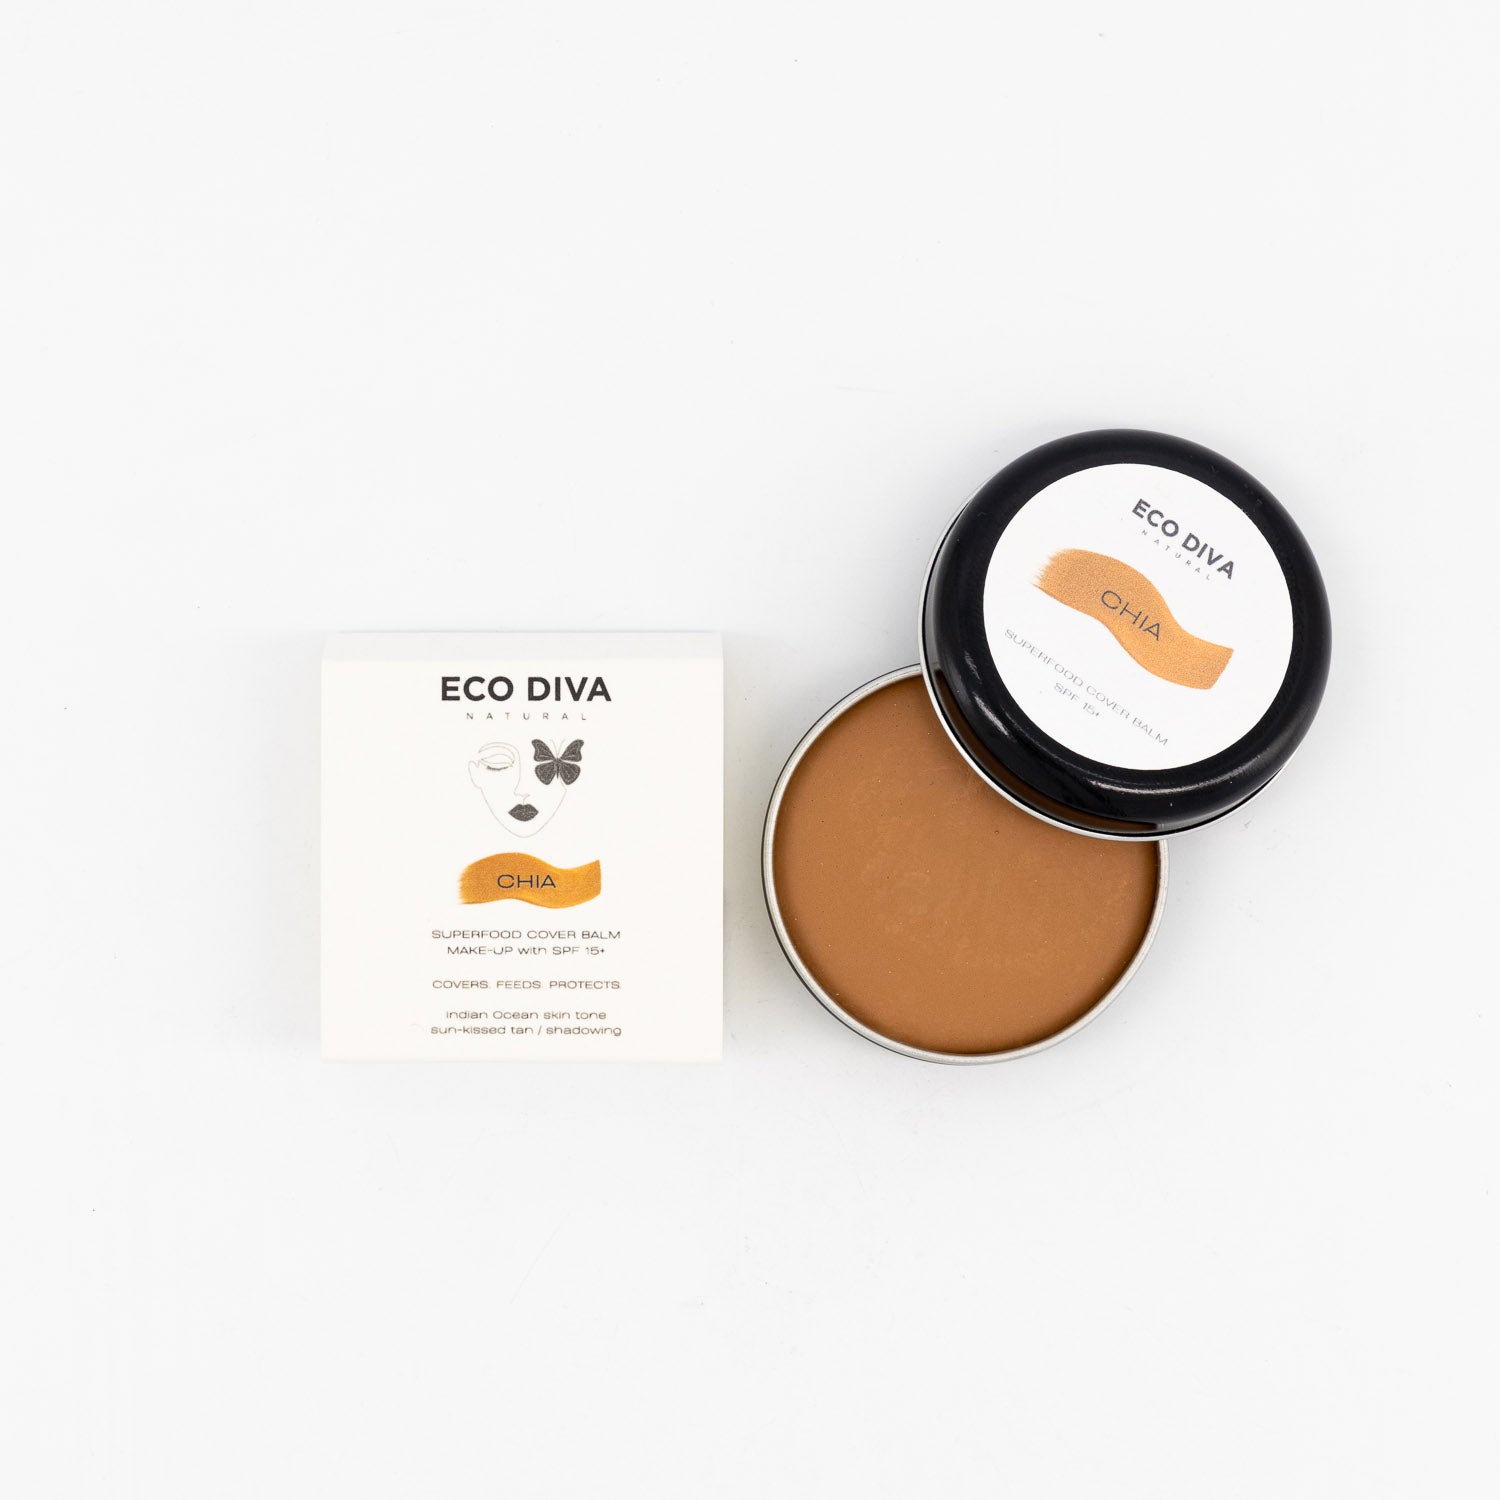 Superfood Makeup Cover Balm Shades